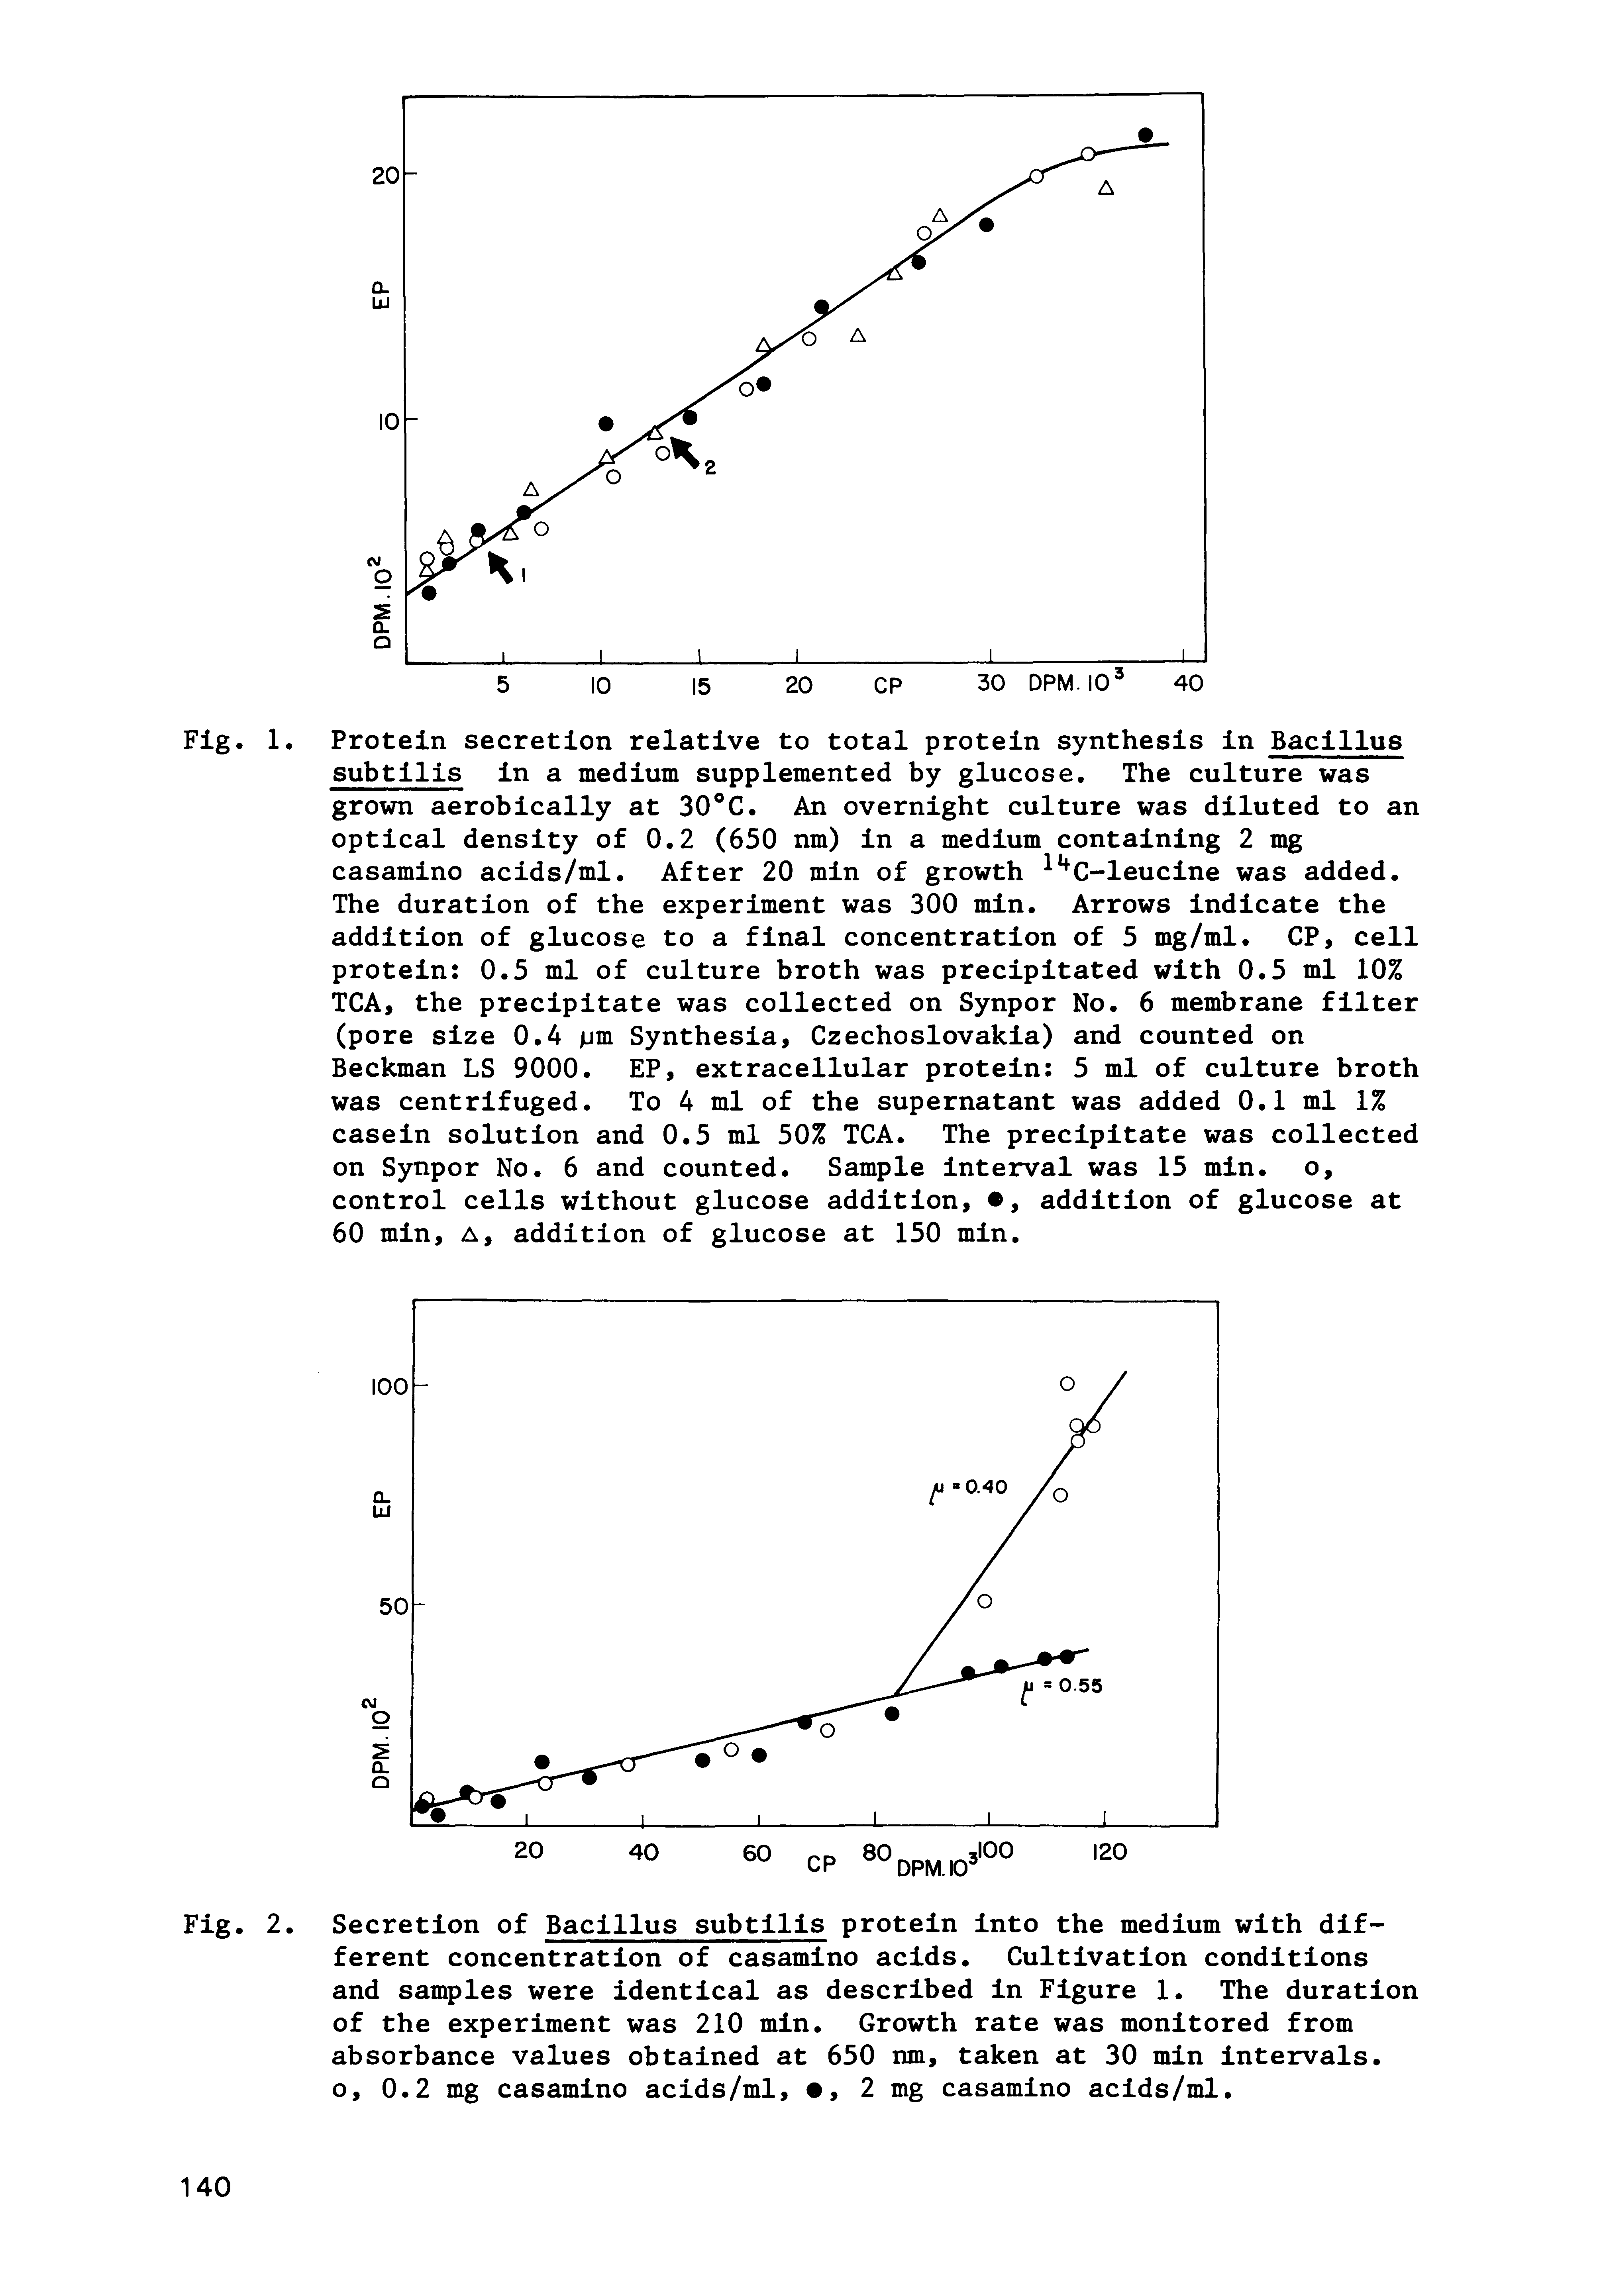 Fig. 2. Secretion of Bacillus subtilis protein into the medium with different concentration of casamino acids. Cultivation conditions and samples were identical as described in Figure 1. The duration of the experiment was 210 min. Growth rate was monitored from absorbance values obtained at 650 nm, taken at 30 min intervals, o, 0.2 mg casamino acids/ml, , 2 mg casamino acids/ml.